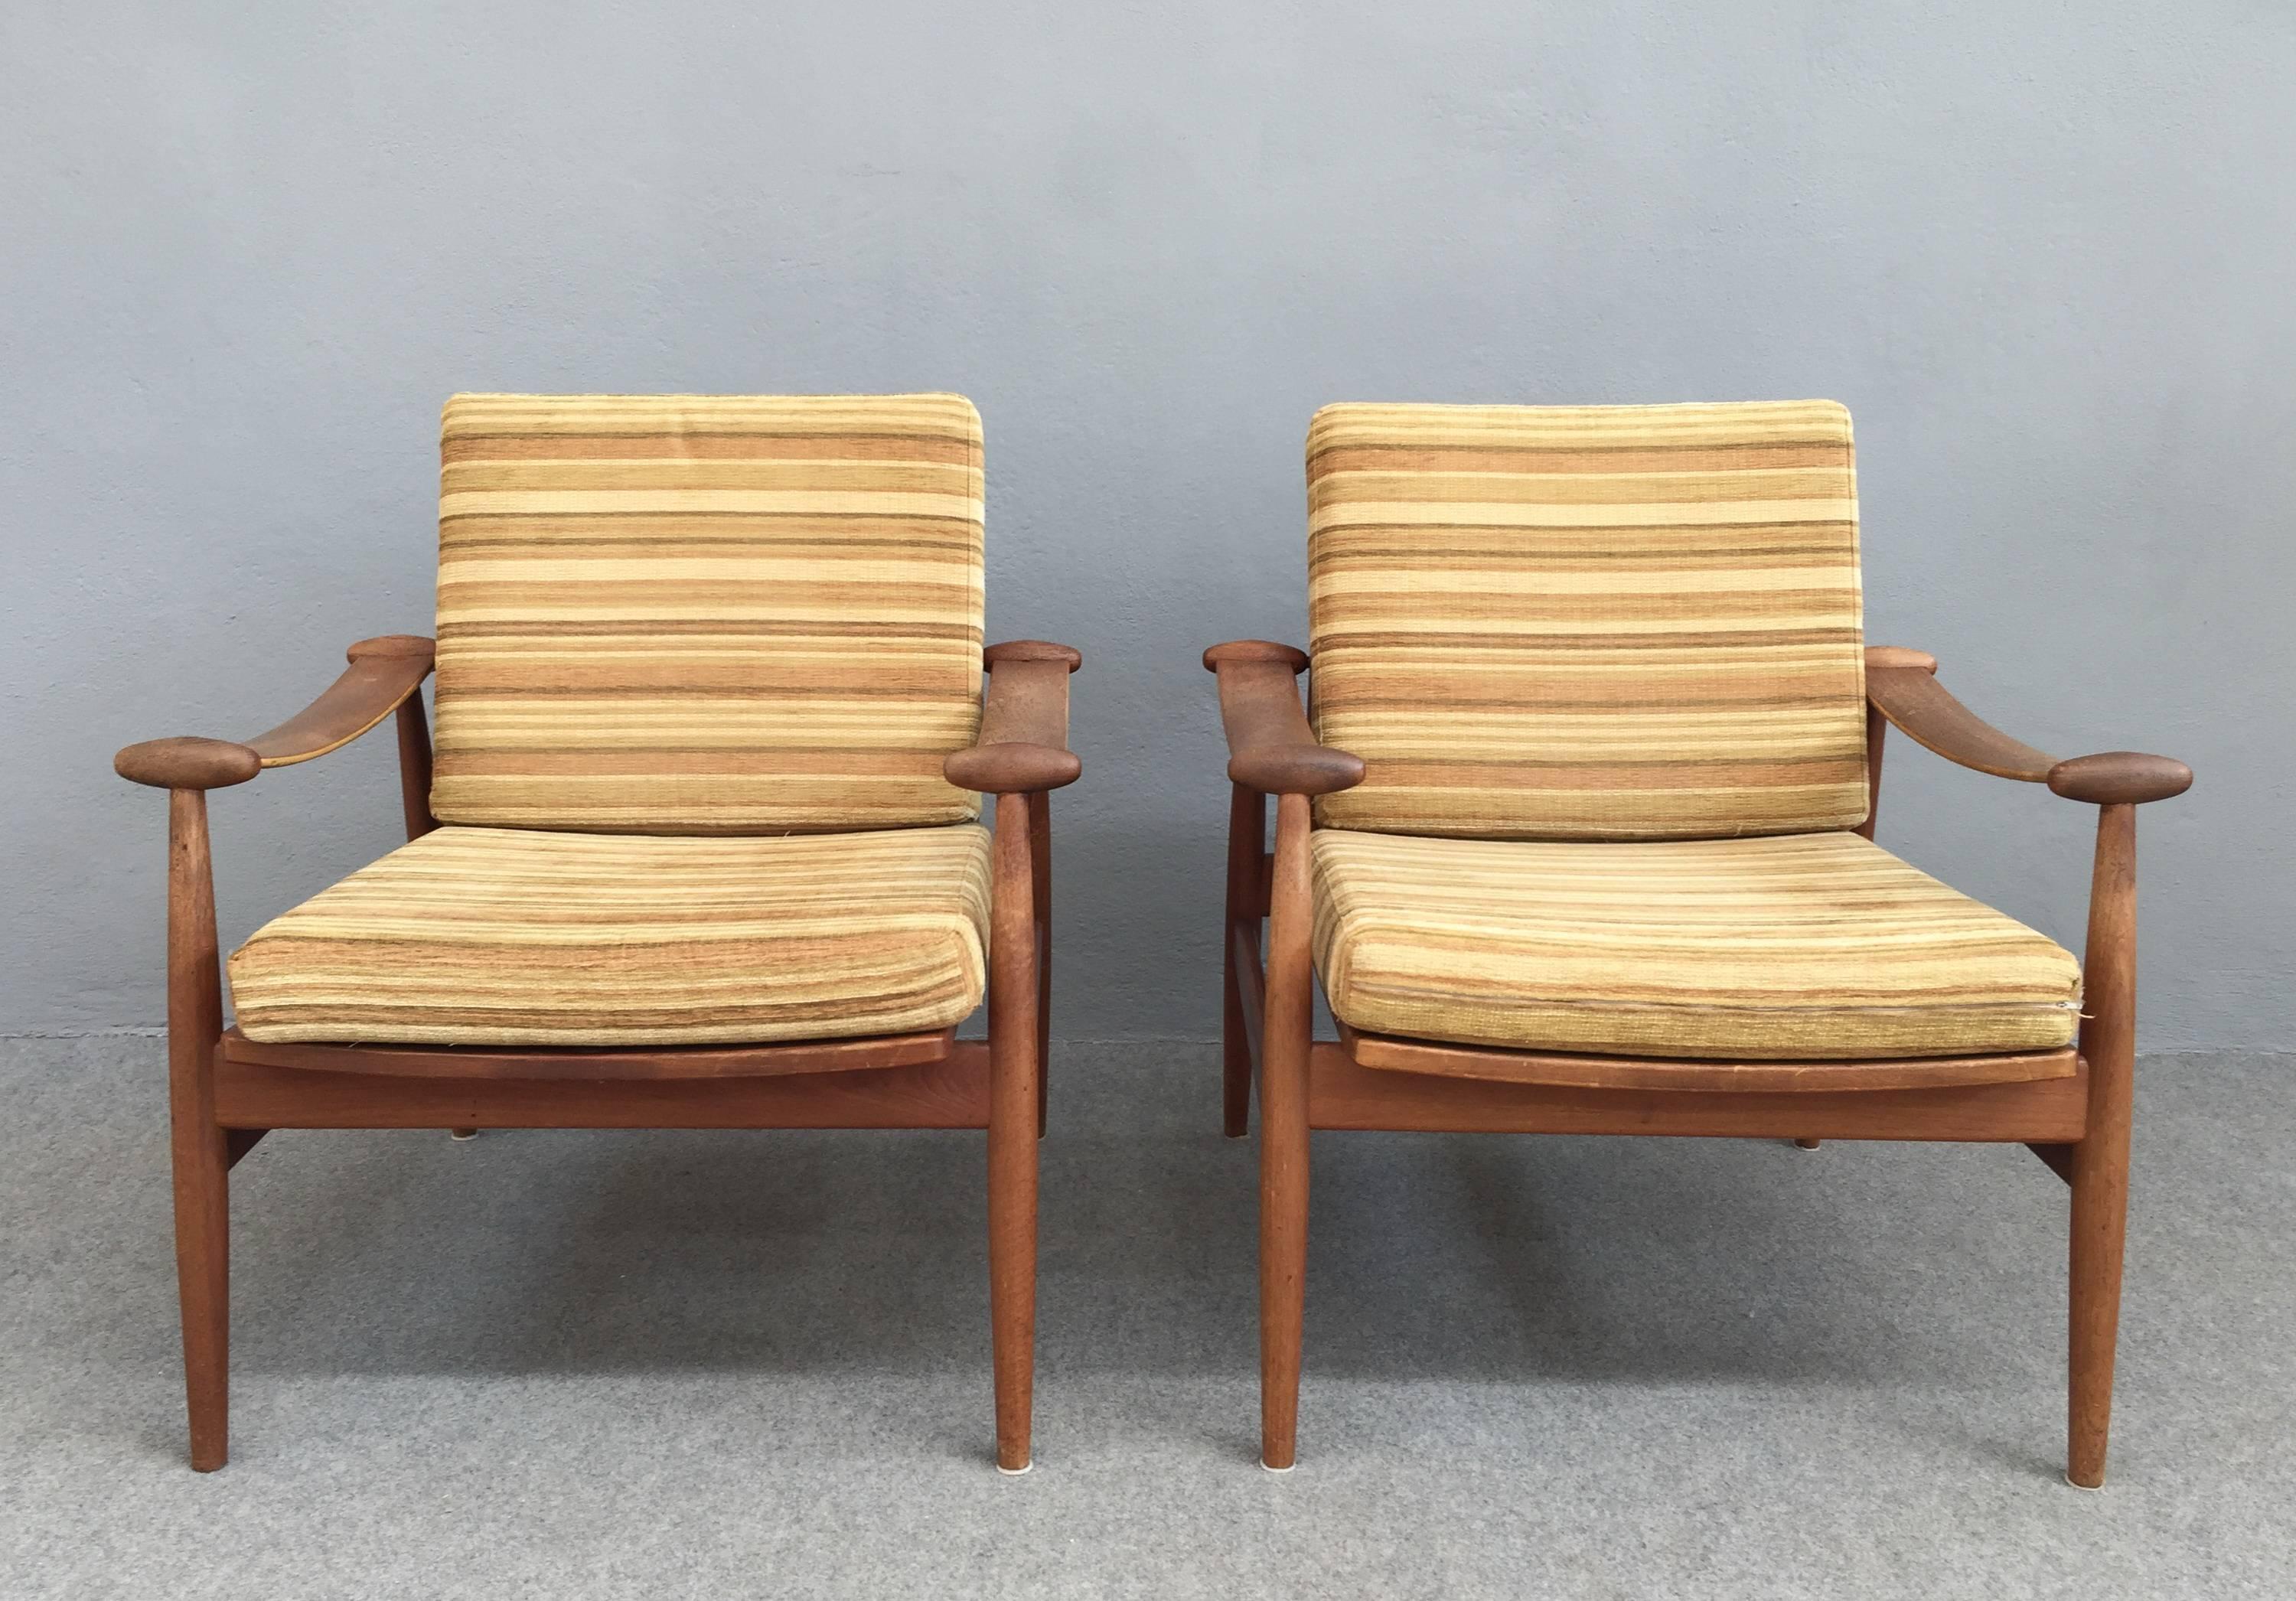 Stunning pair of Finn Juhl lounge chairs.
Model 133, Spade chairs, with original upholstery. Brass label.